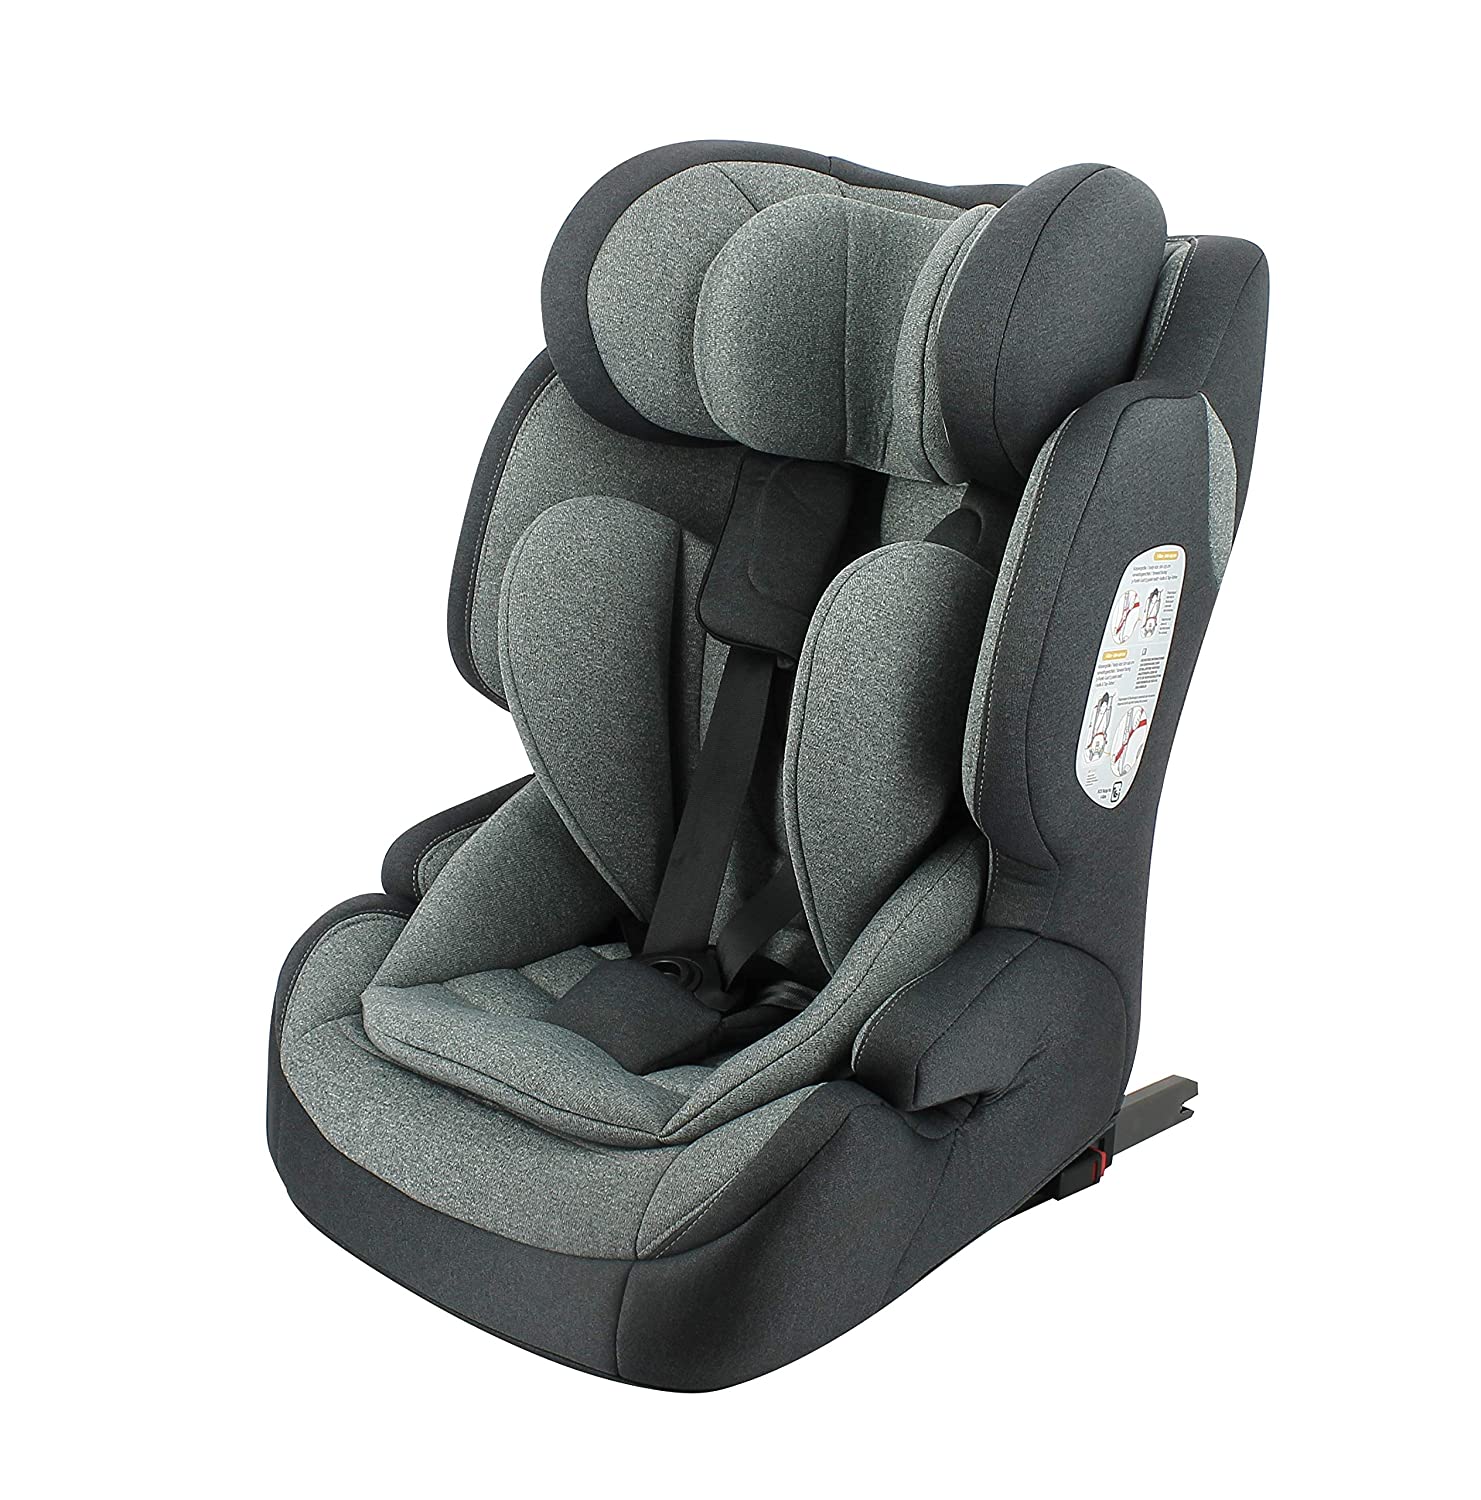 Nania PLUTO 76-150 cm car seat with side protection and Isofix attachment